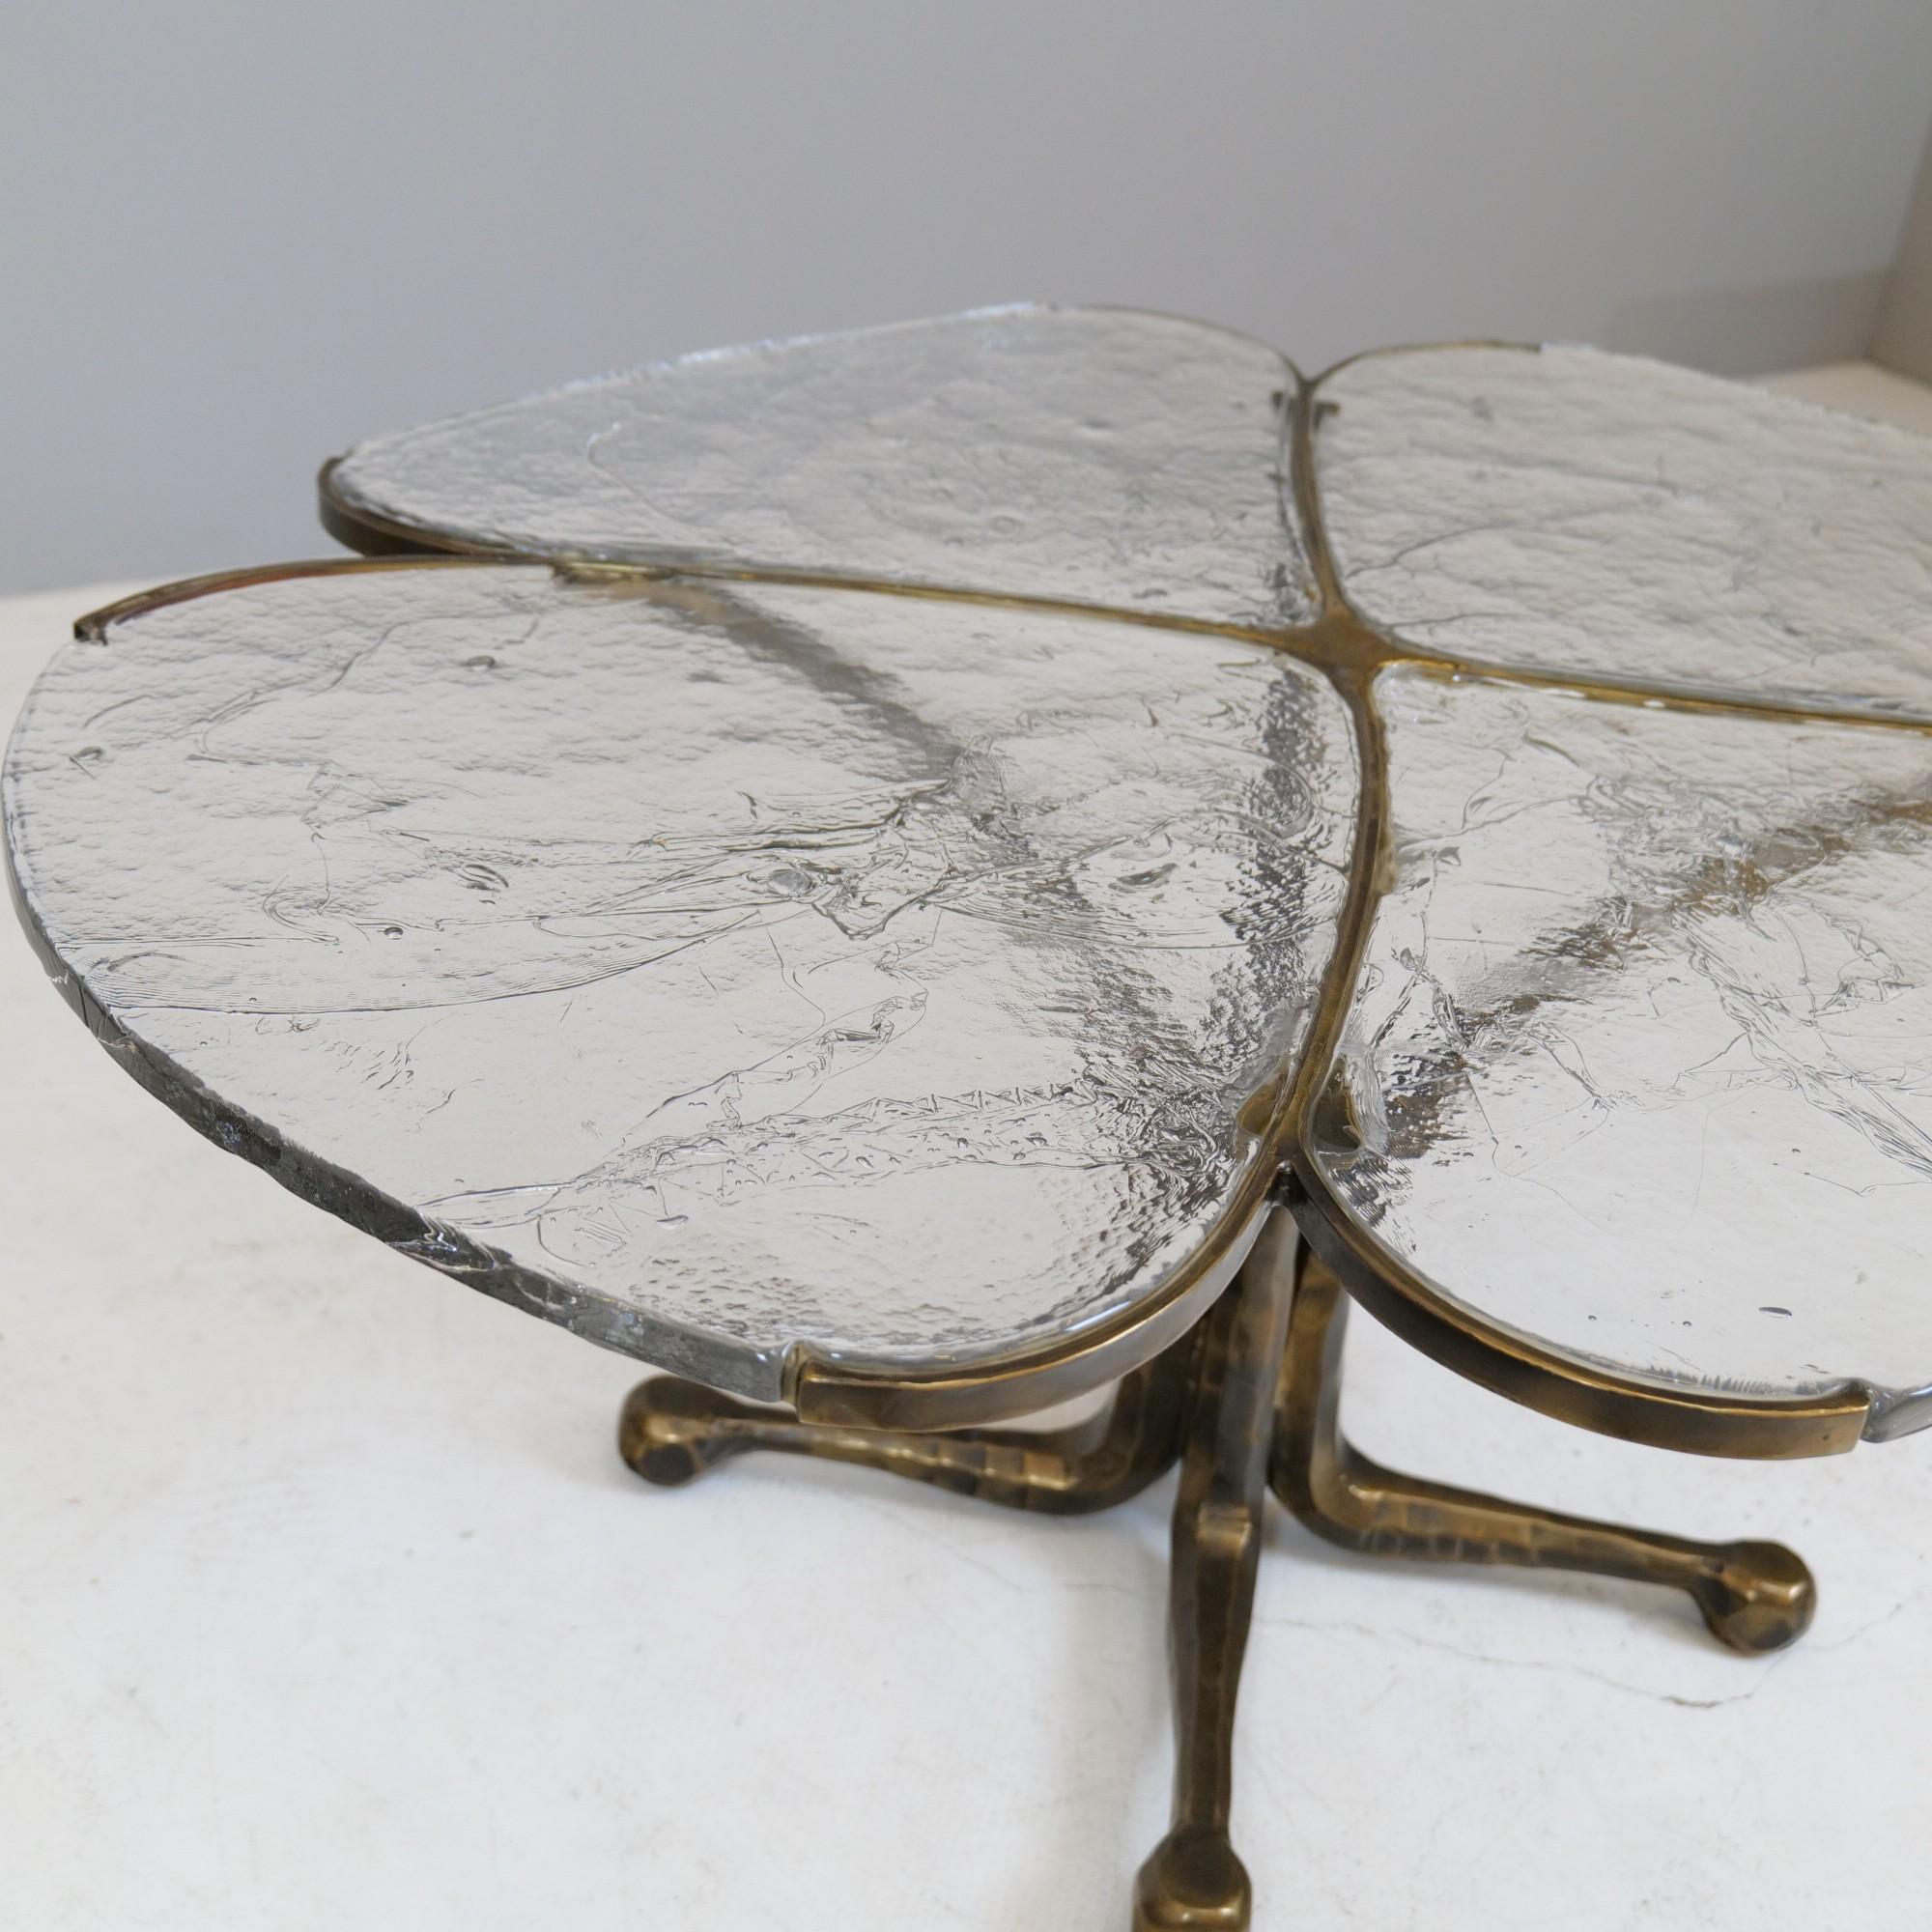 Vintage Forged Bronze Table Signed Lothar Klute, 1994 Germany For Sale 2